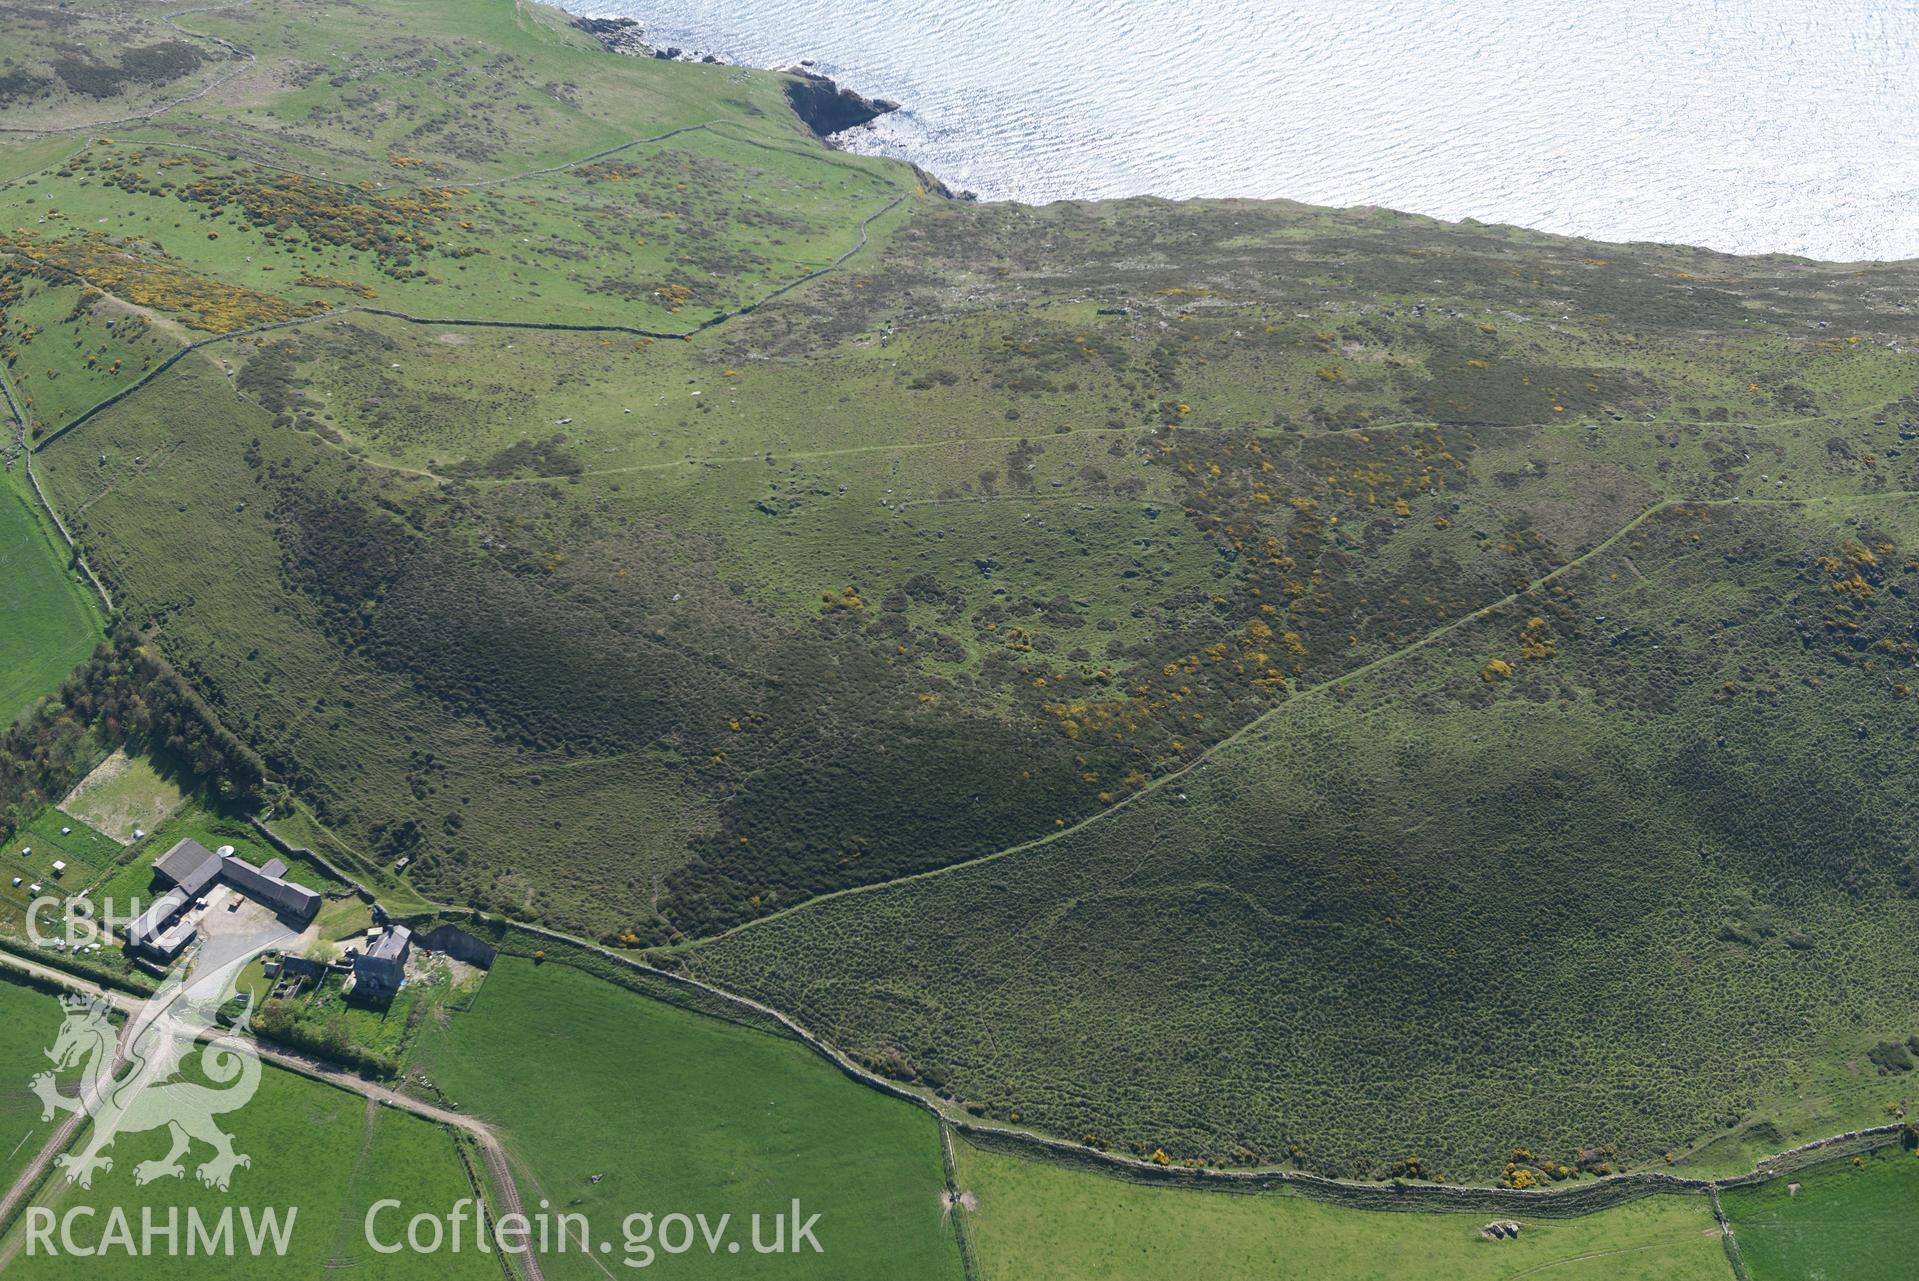 Aerial photography of Mynydd y Graig taken on 3rd May 2017.  Baseline aerial reconnaissance survey for the CHERISH Project. ? Crown: CHERISH PROJECT 2017. Produced with EU funds through the Ireland Wales Co-operation Programme 2014-2020. All material made freely available through the Open Government Licence.